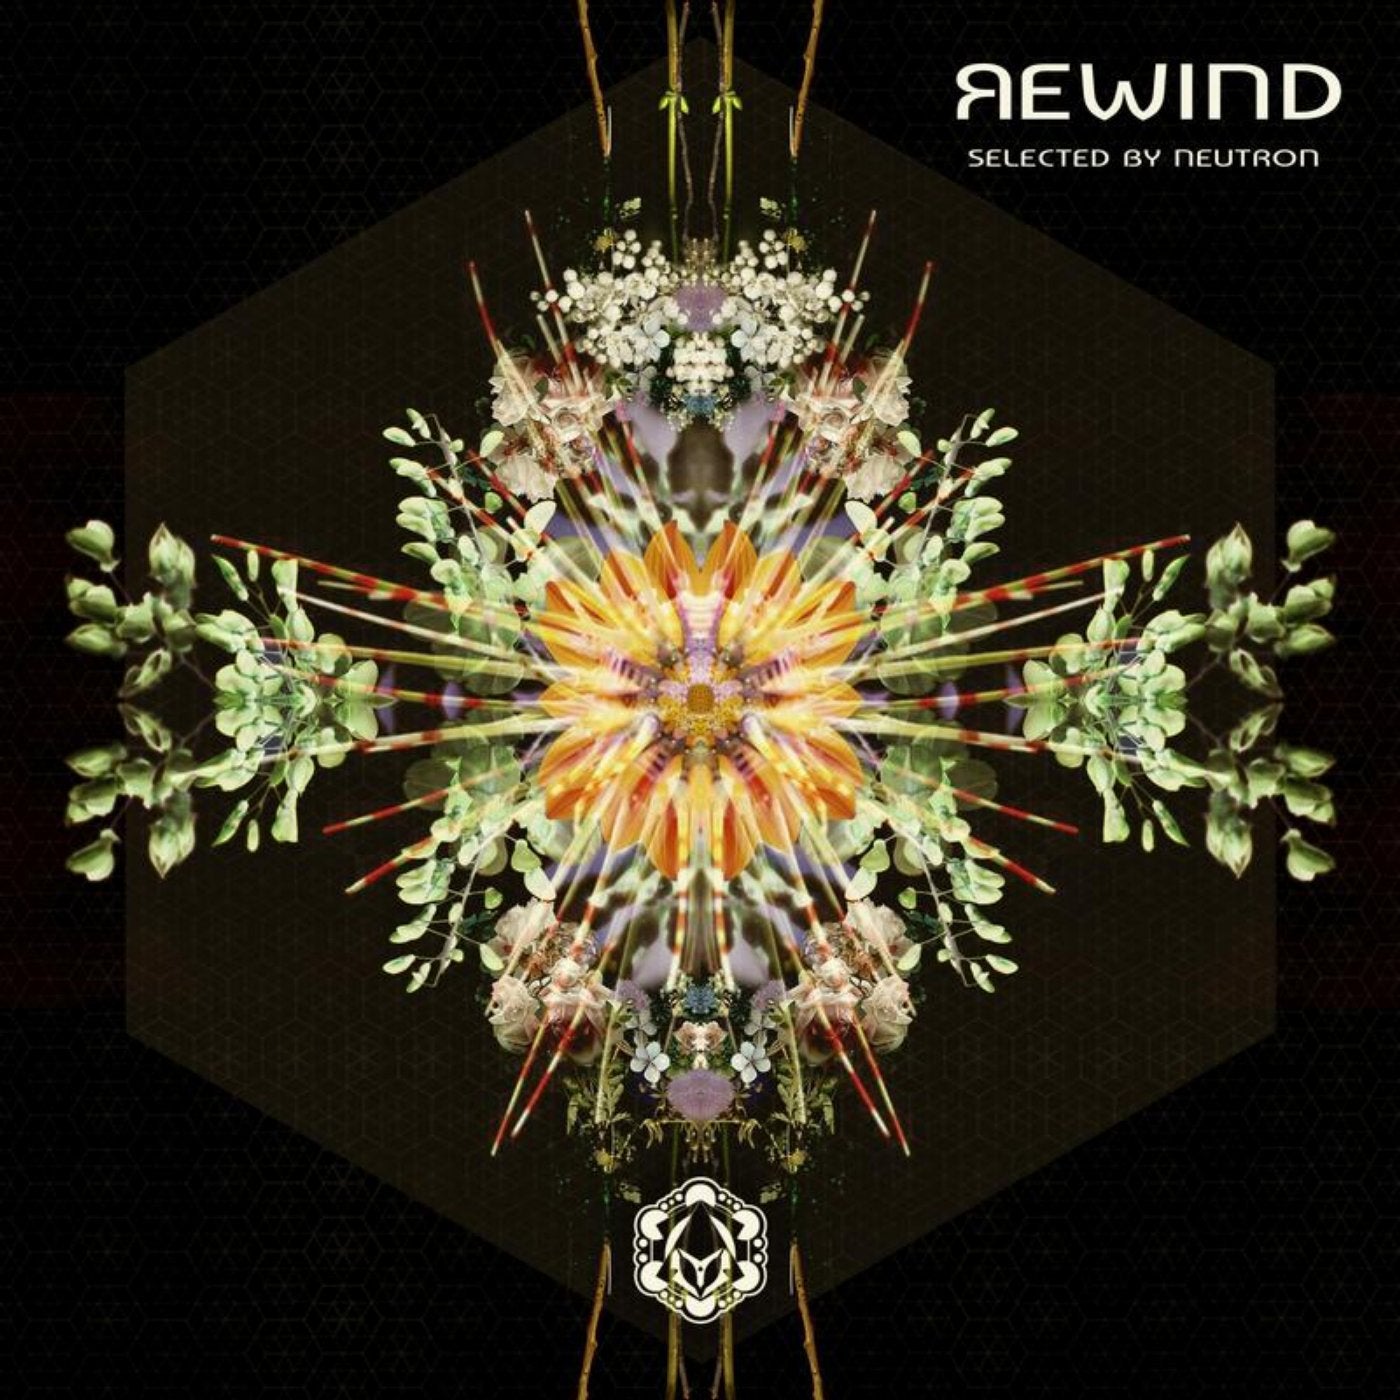 REWIND - Selected by Neutron